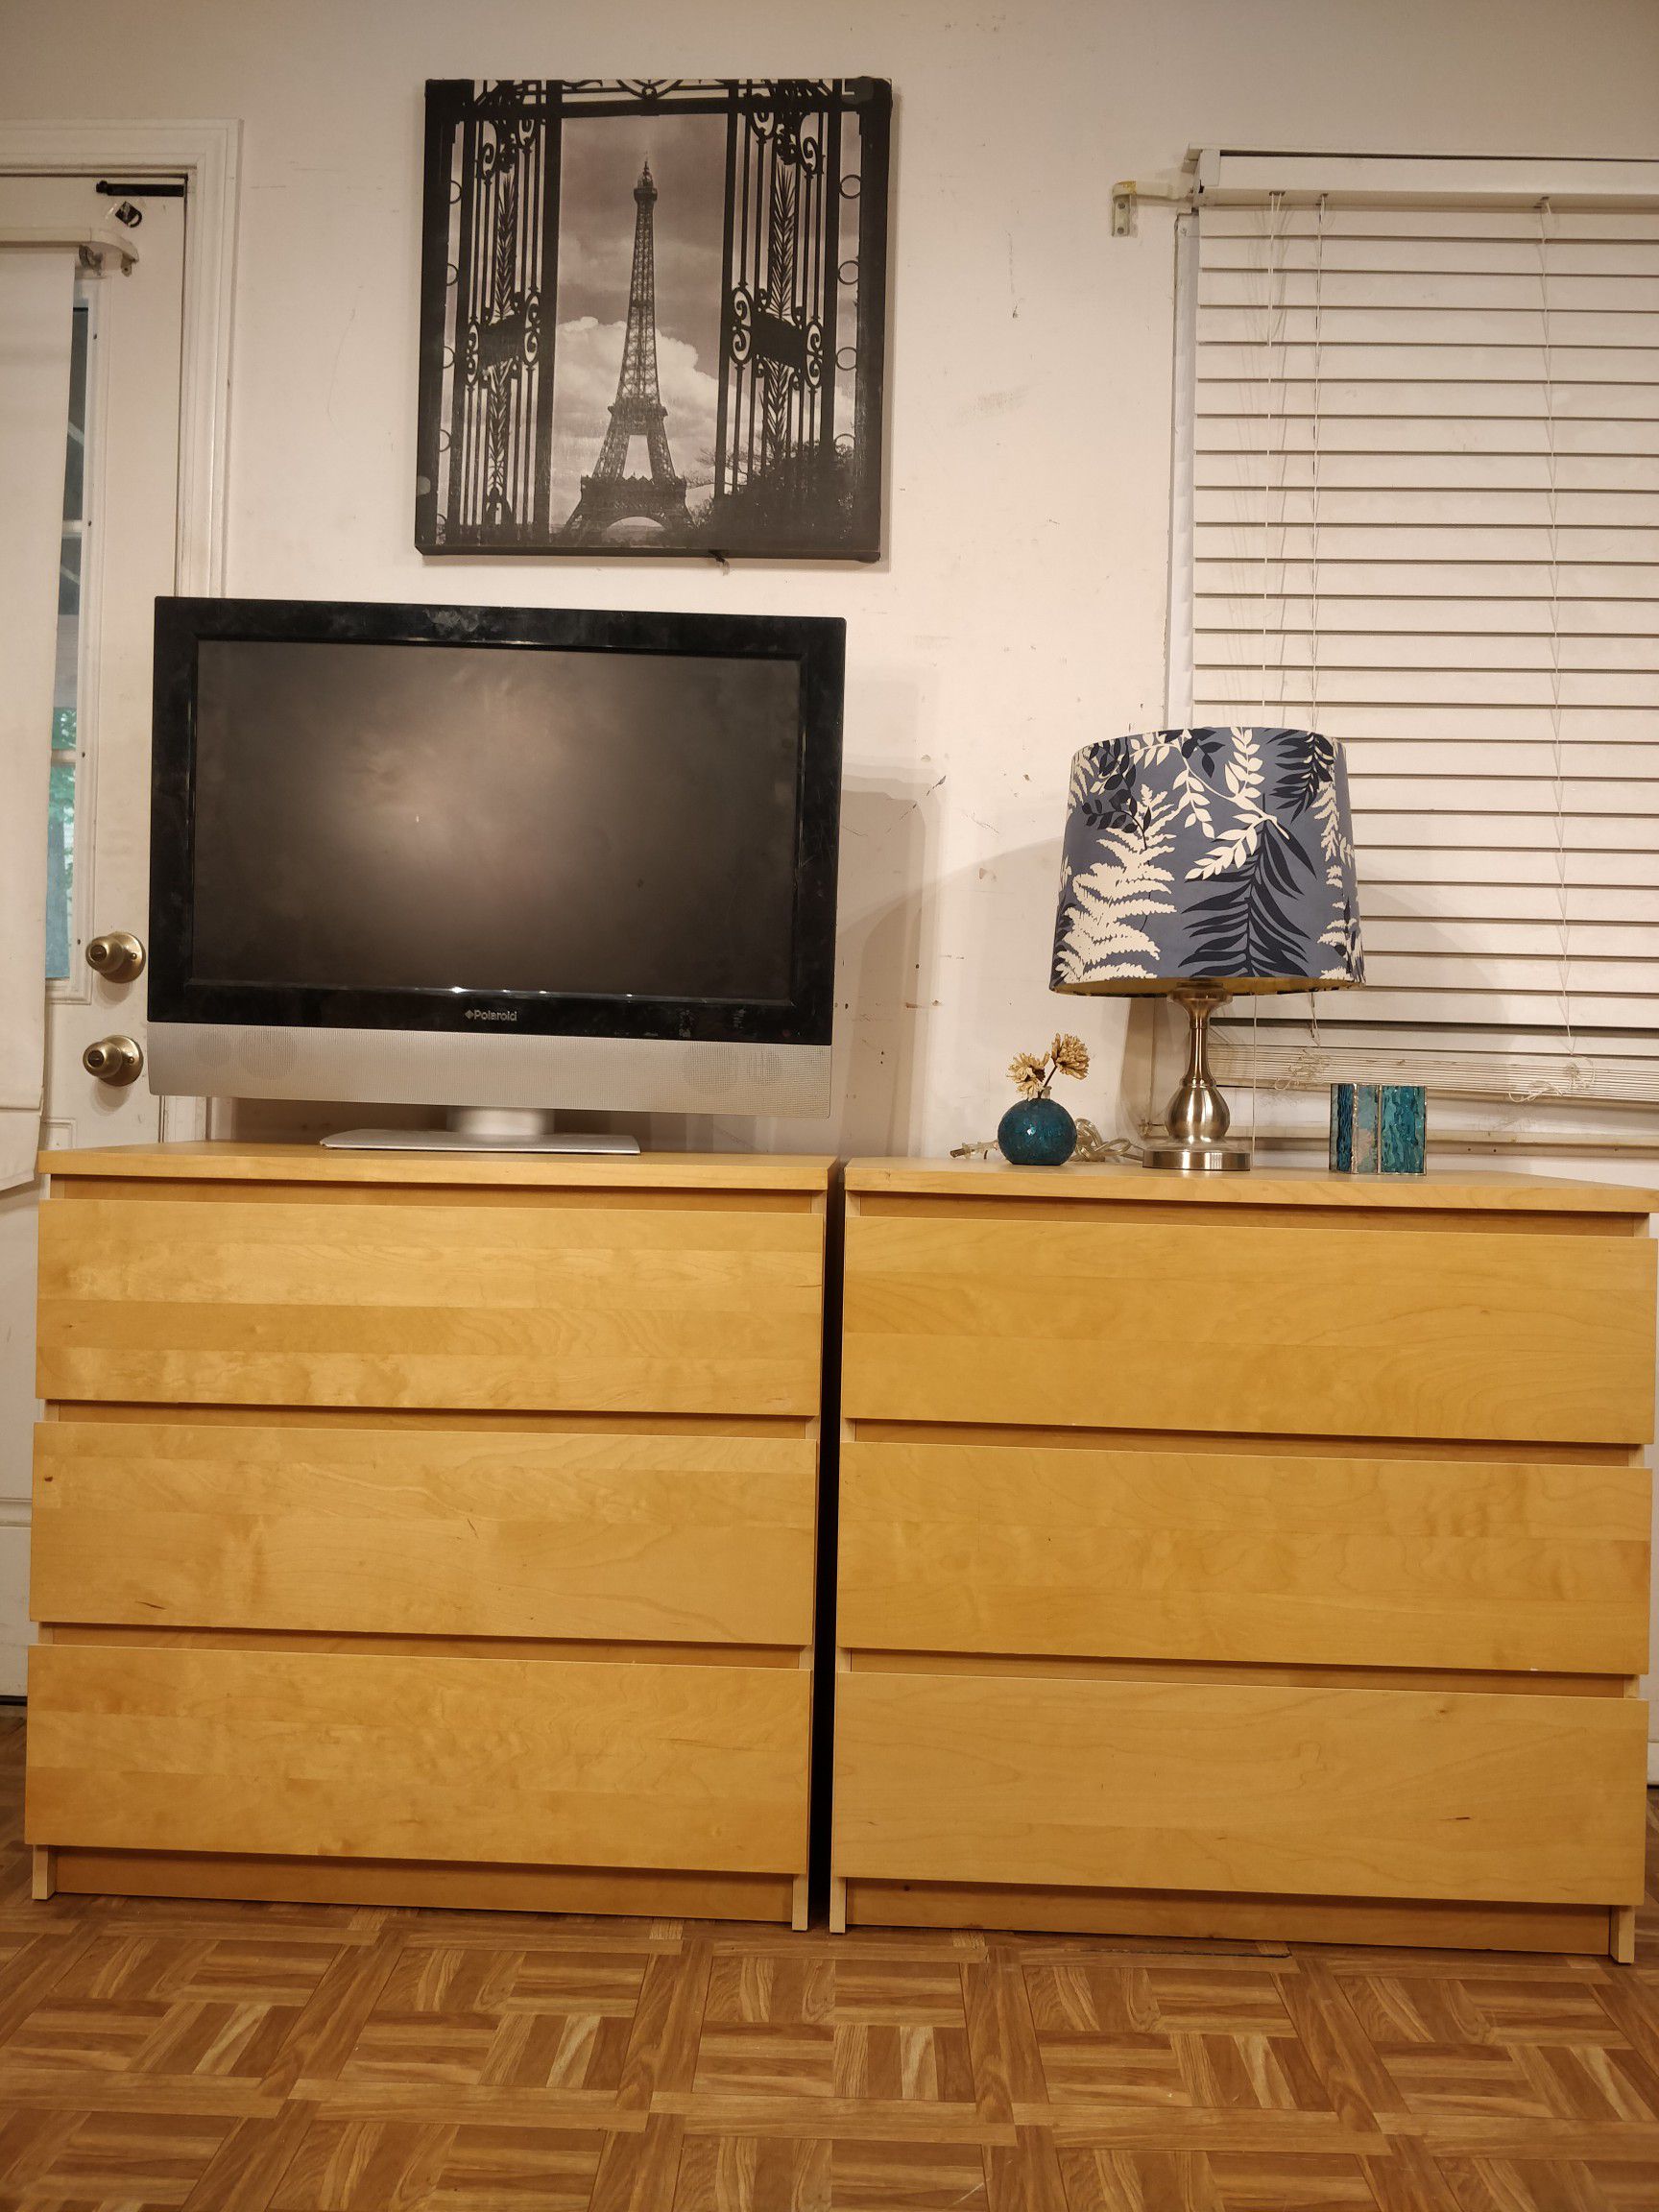 Nice 2 matching dressers with big drawers in good condition all drawers working well, driveway pickup. L31.5"*W19"*H30.3"